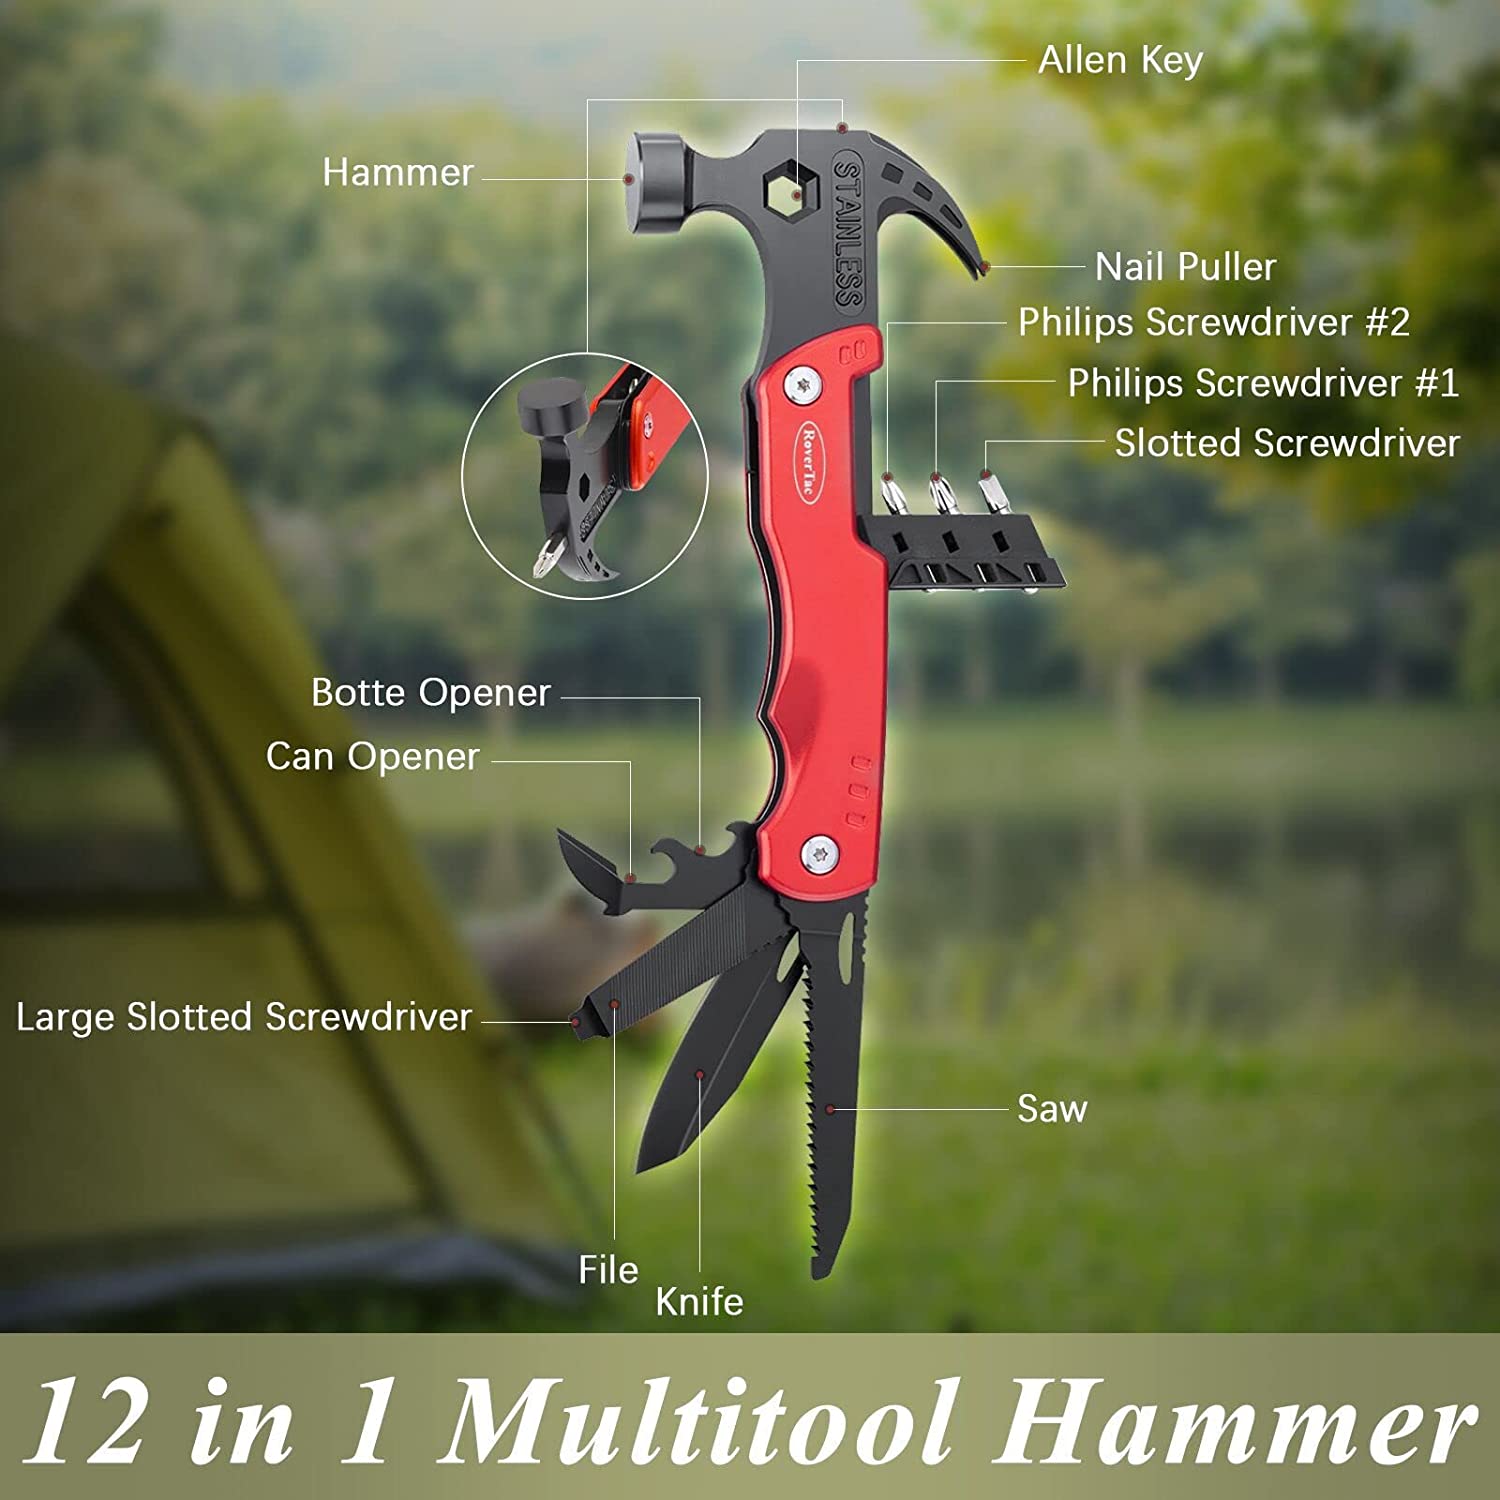 All in One Tools Mini Hammer Multitool, Gifts for Husband Boyfriend Him,  Anniversary Birthday Gift Ideas for Men, Cool Gadgets Presents Stocking  Stuffers for Men 